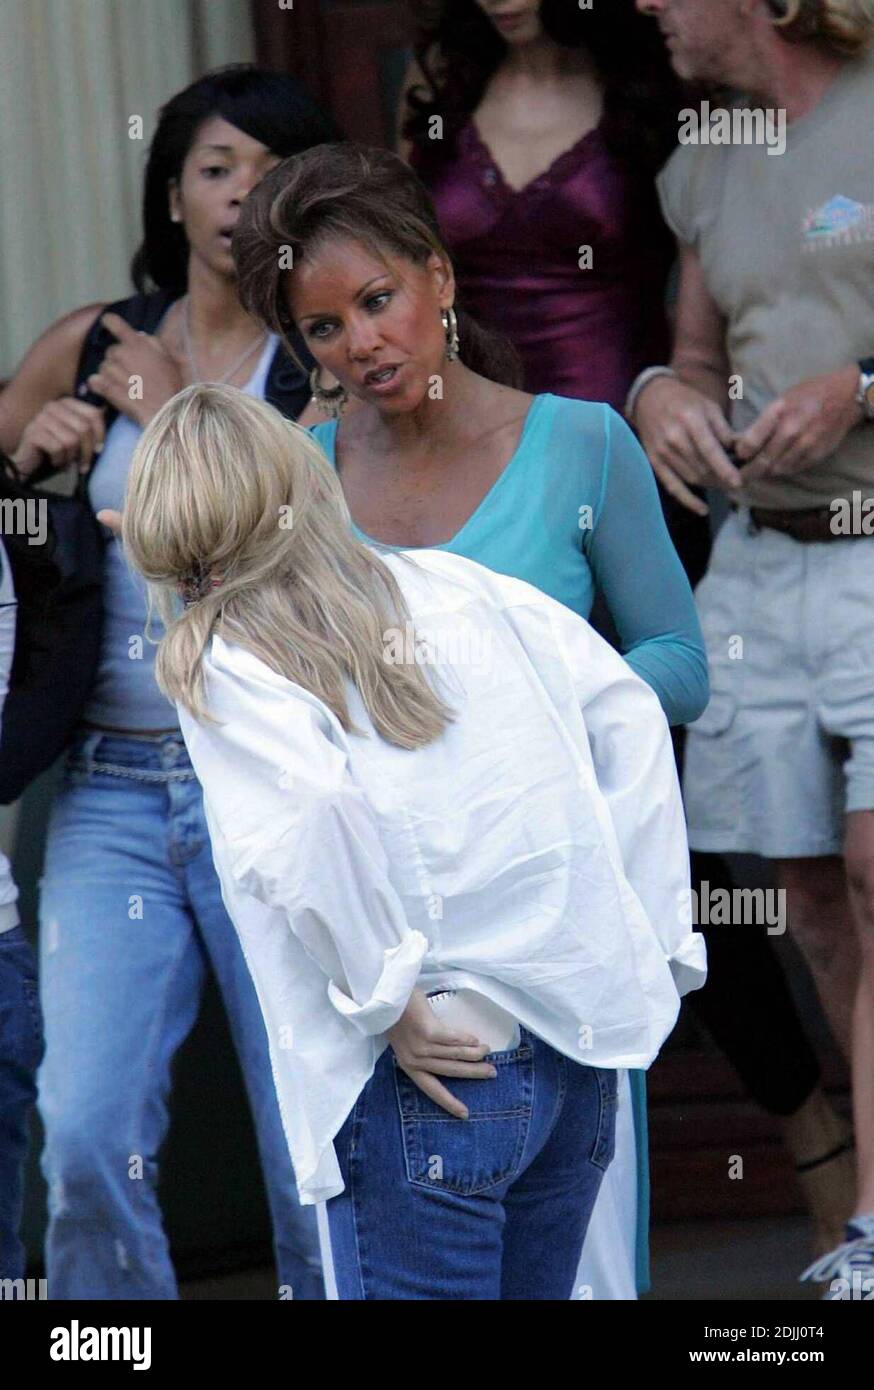 Exclusive!! Vanessa Williams on the set of the TV pilot called 'South Beach' which is being filmed in Miami. The show is being produced by Jennifer Lopez 4/6/05 Stock Photo